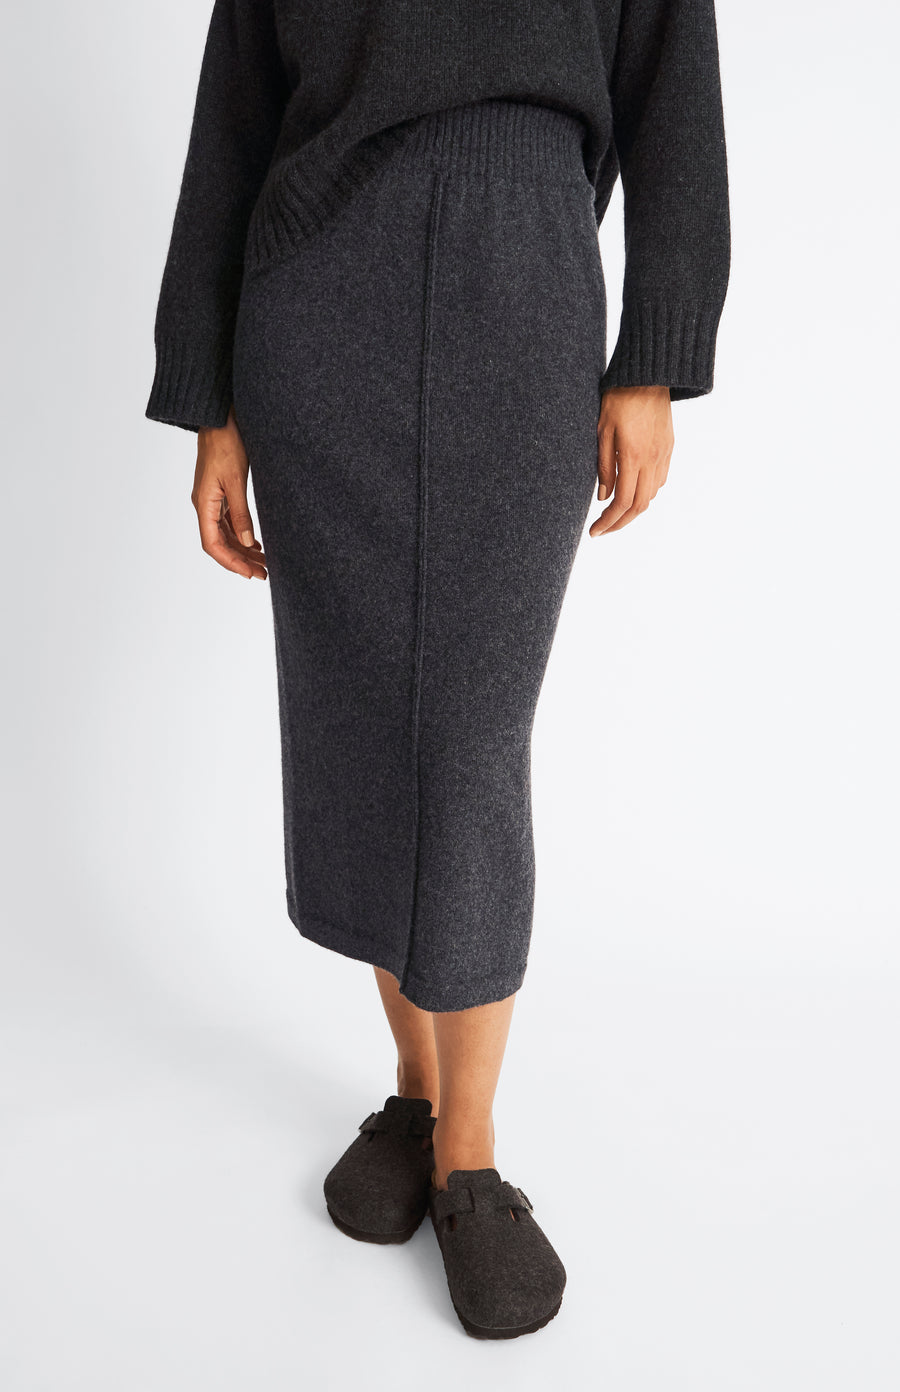 Pringle of Scotland Cashmere Blend Pencil Skirt in Charcoal on model